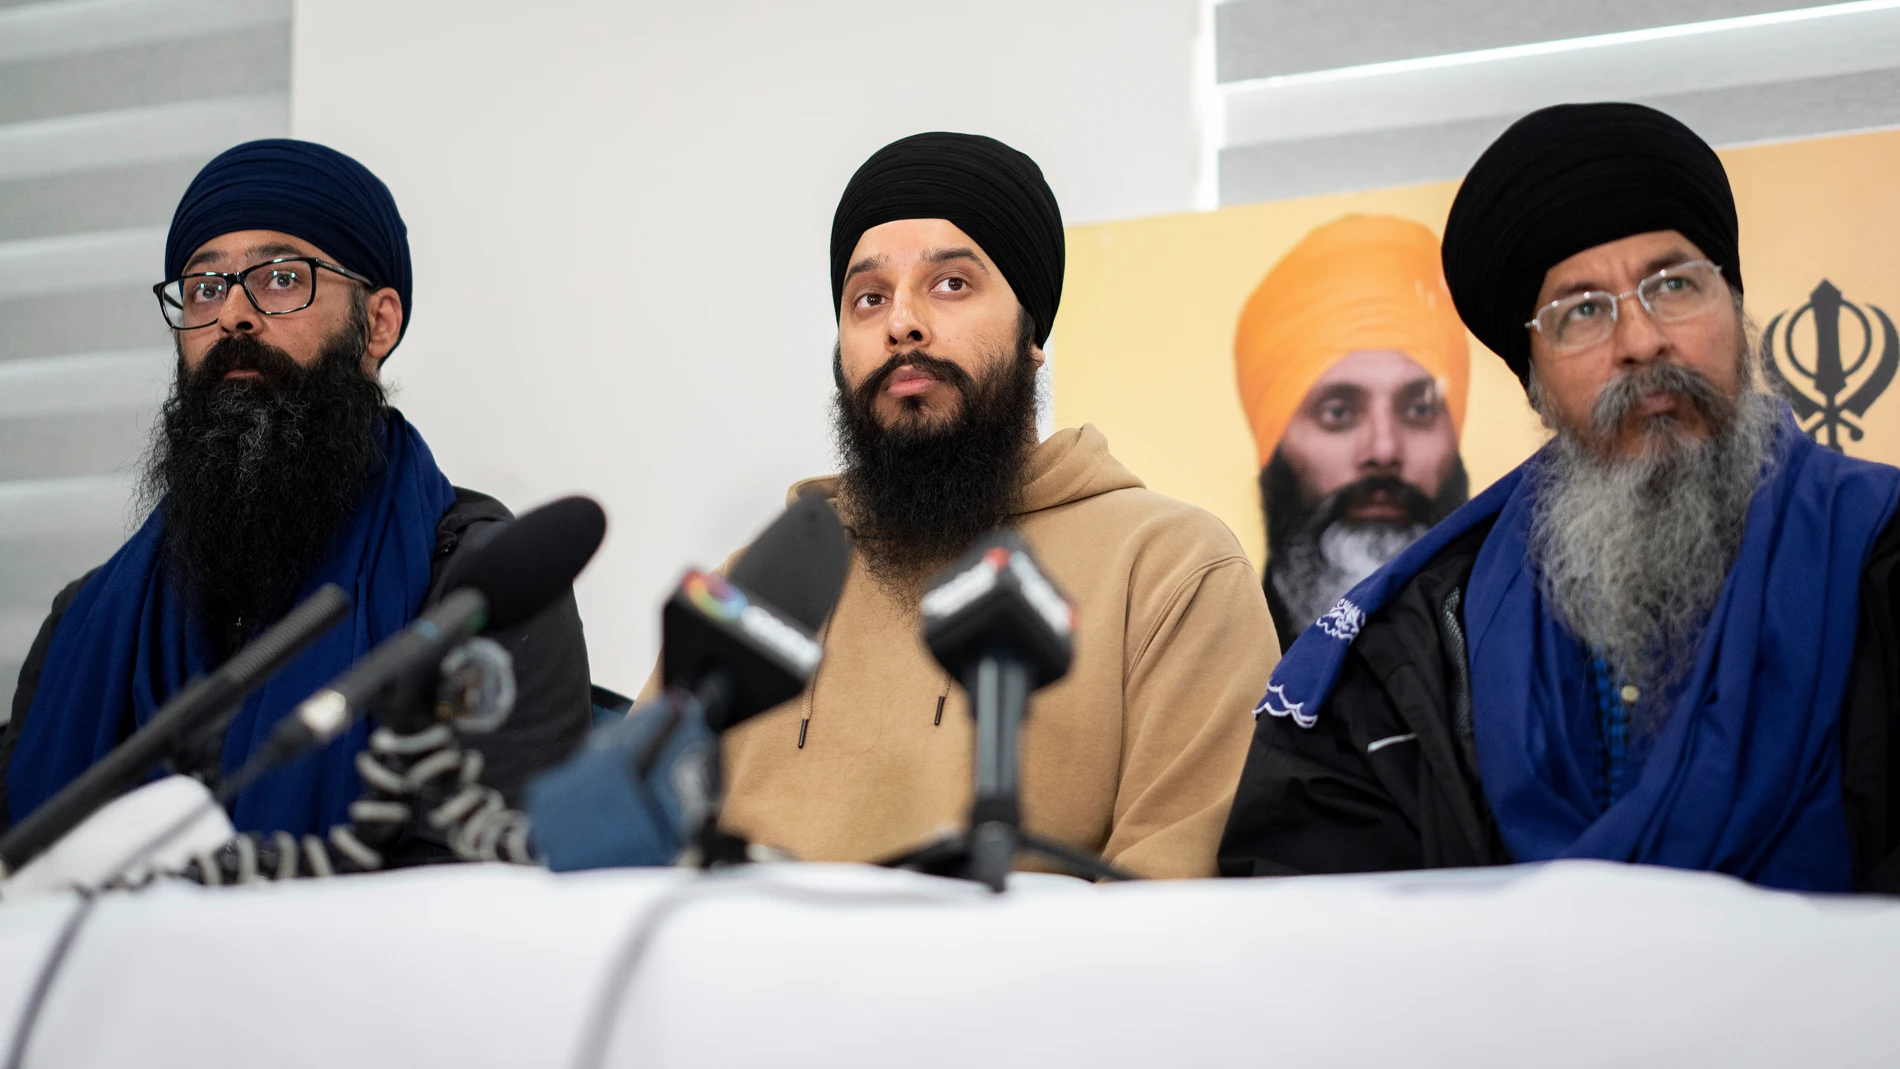 From Left to right, Moninder Singh, Brabjot Singh, and Gurmeet Singh, listen to media questions during a news conference providing an update from the executive members and committee of the Guru Nanak Sikh Gurdwara about the Hardeep Singh Nijjar homicide from June 18, 2023 in Surrey, B.C. on Friday, May 3, 2024. (Ethan Cairns/The Canadian Press via AP)